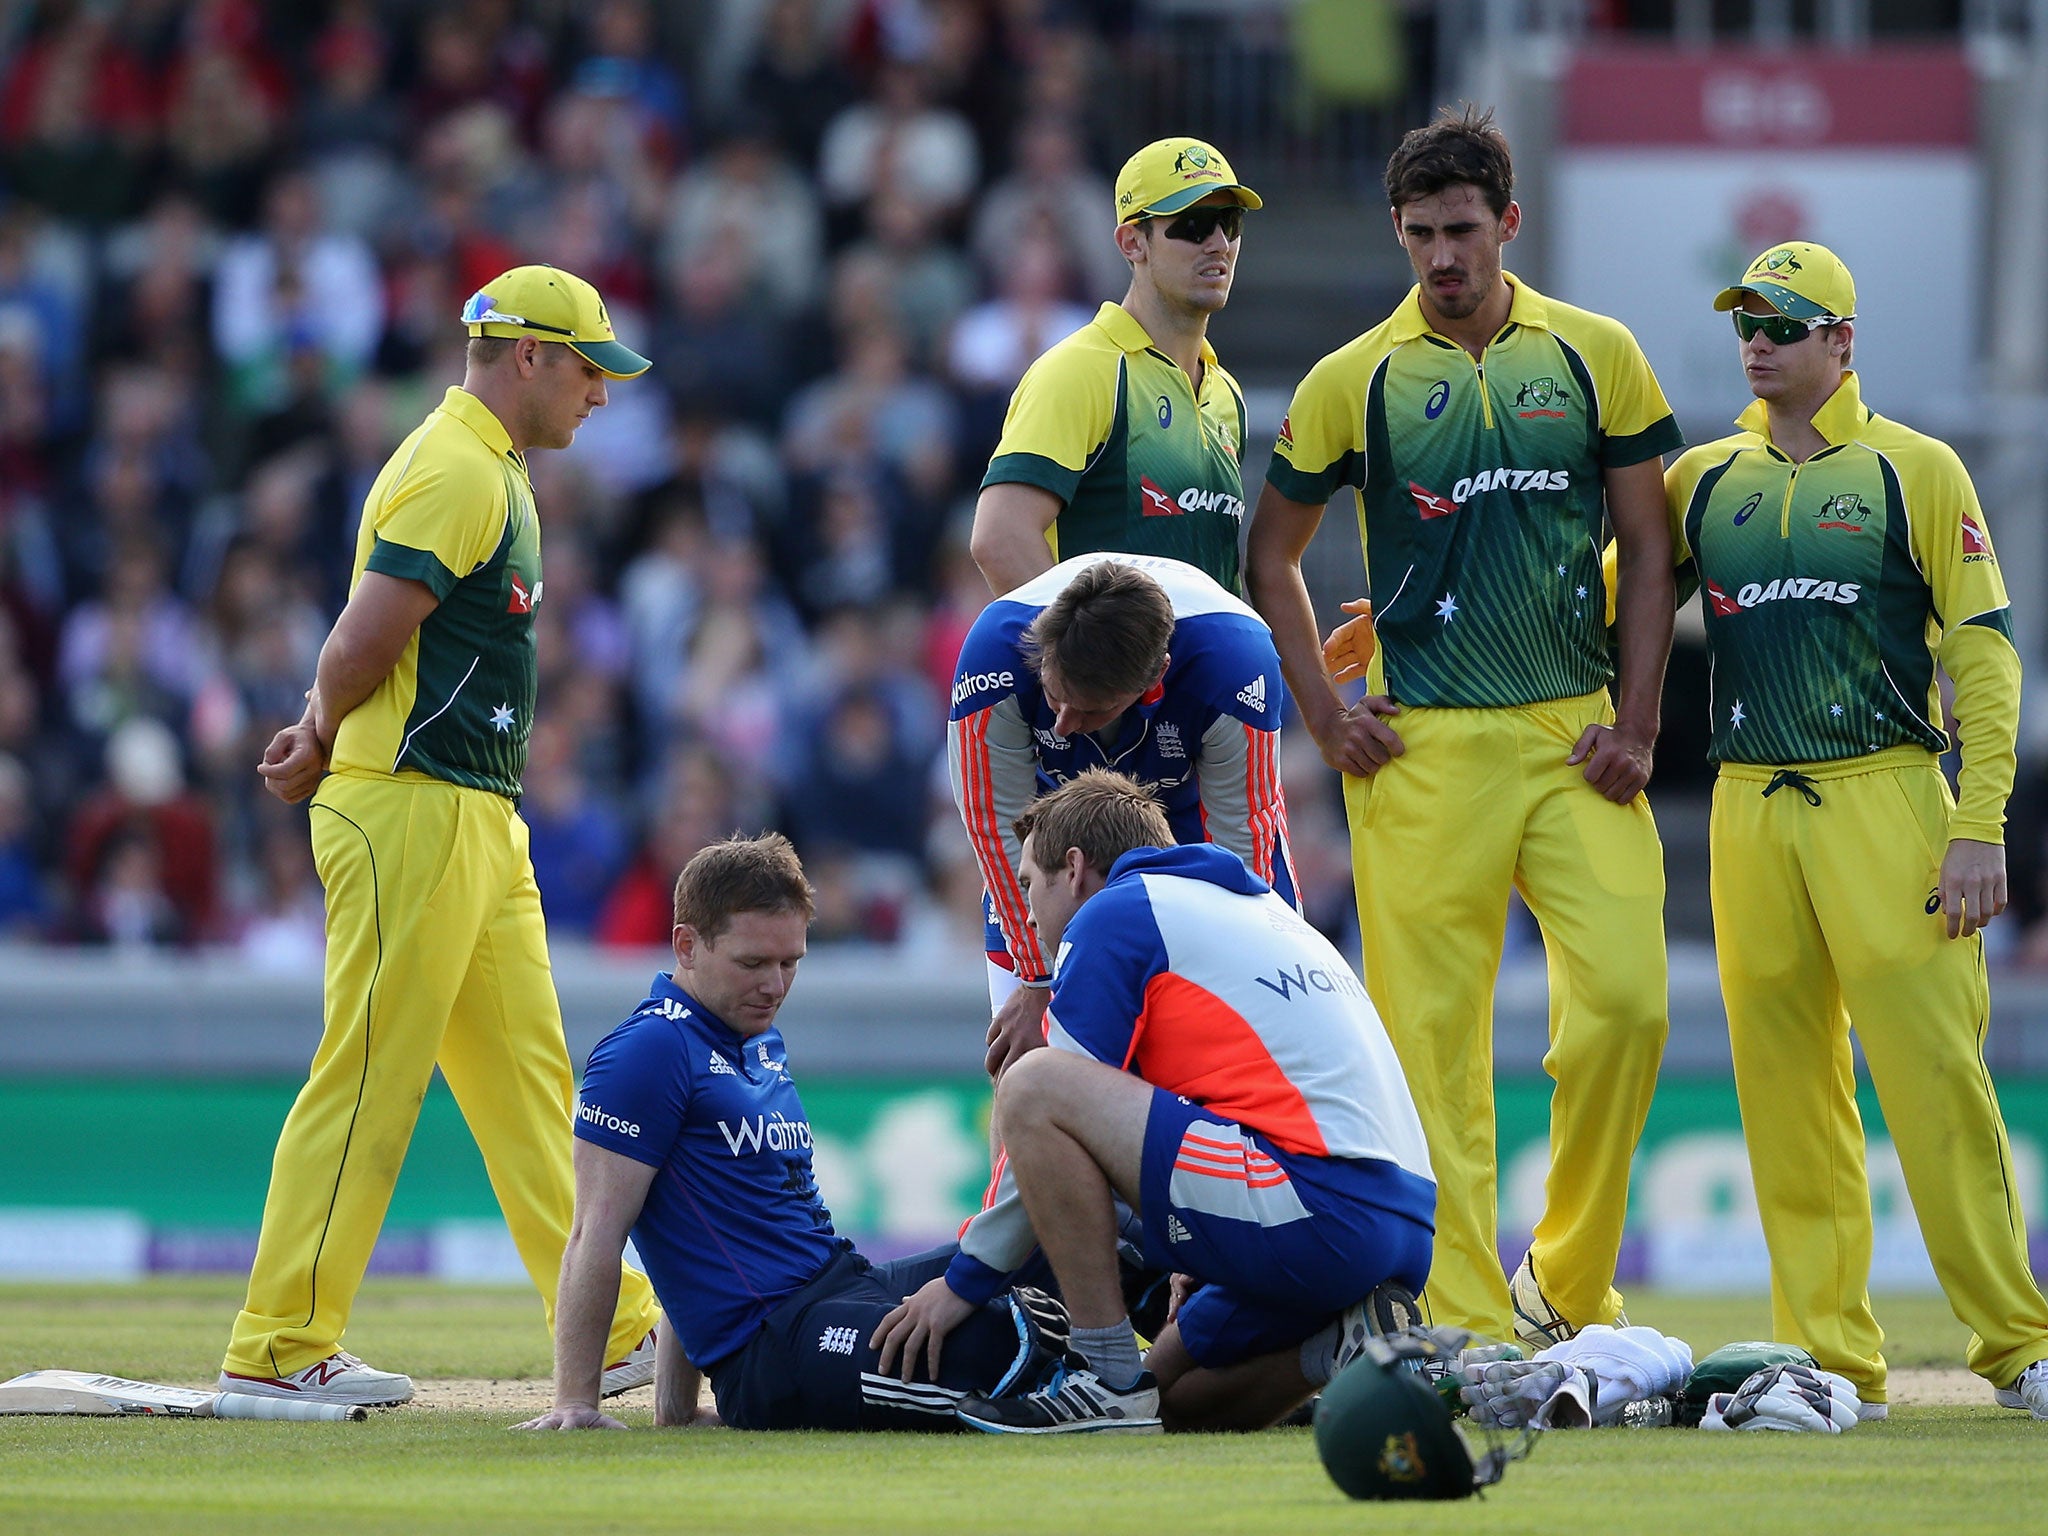 Eoin Morgan receives treatment after taking a ball to the head in the final ODI with Australia